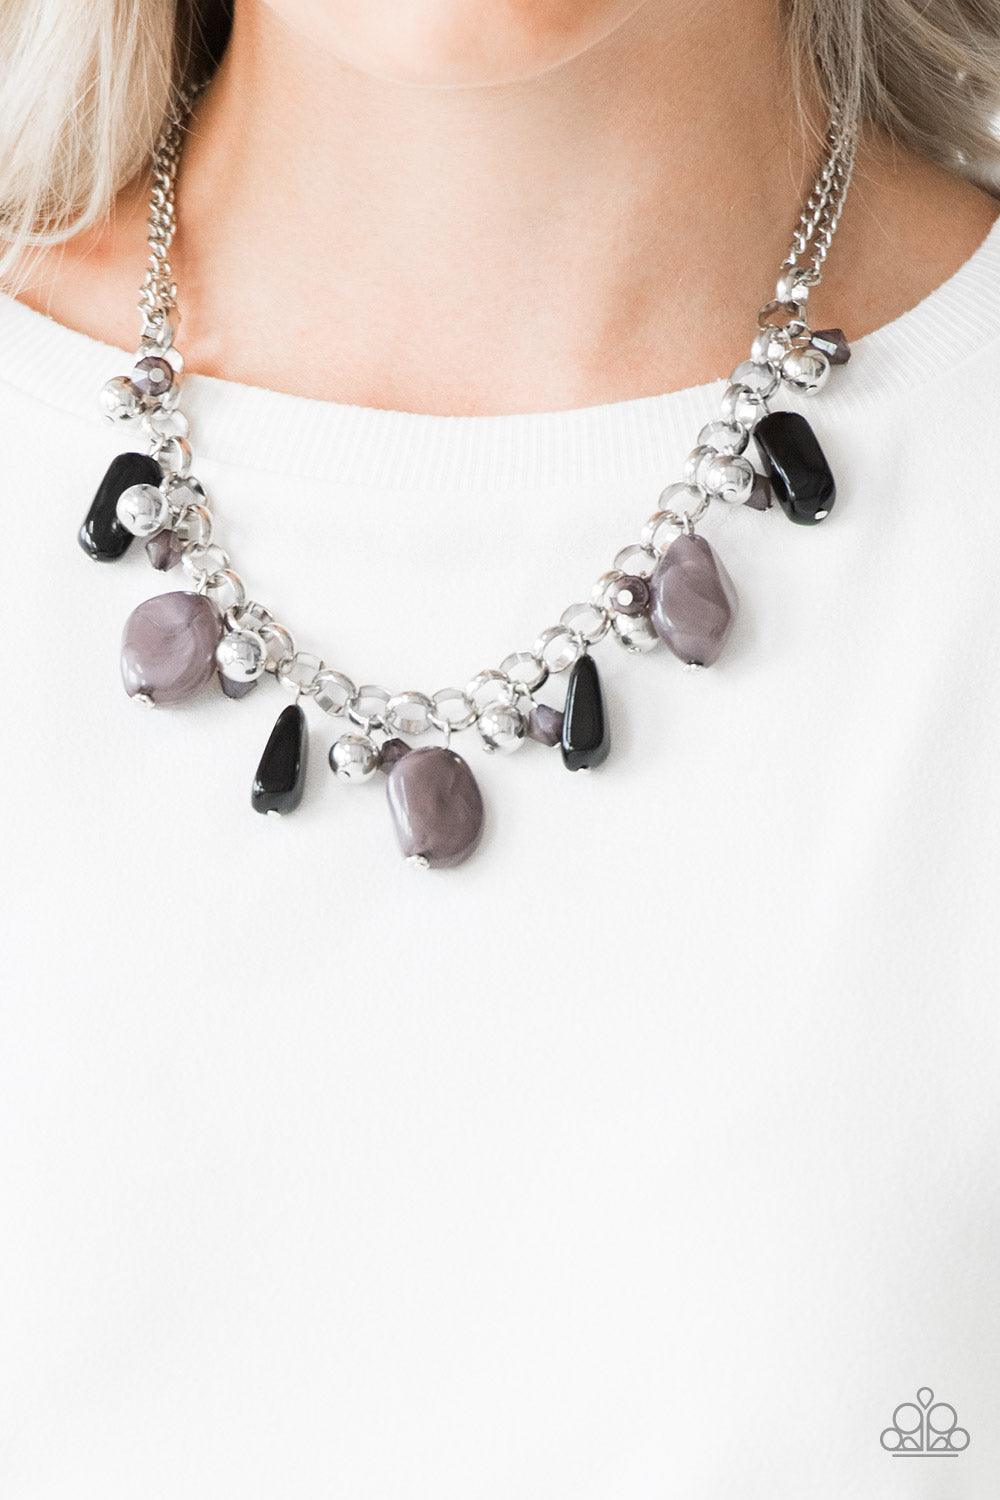 Paparazzi Accessories Grand Canyon Grotto - Black Featuring polished and cloudy finishes, a collection of black faux rocks dance from the bottom of a bold silver chain. Classic silver beads trickle between the colorful beading, adding a metallic shimmer t